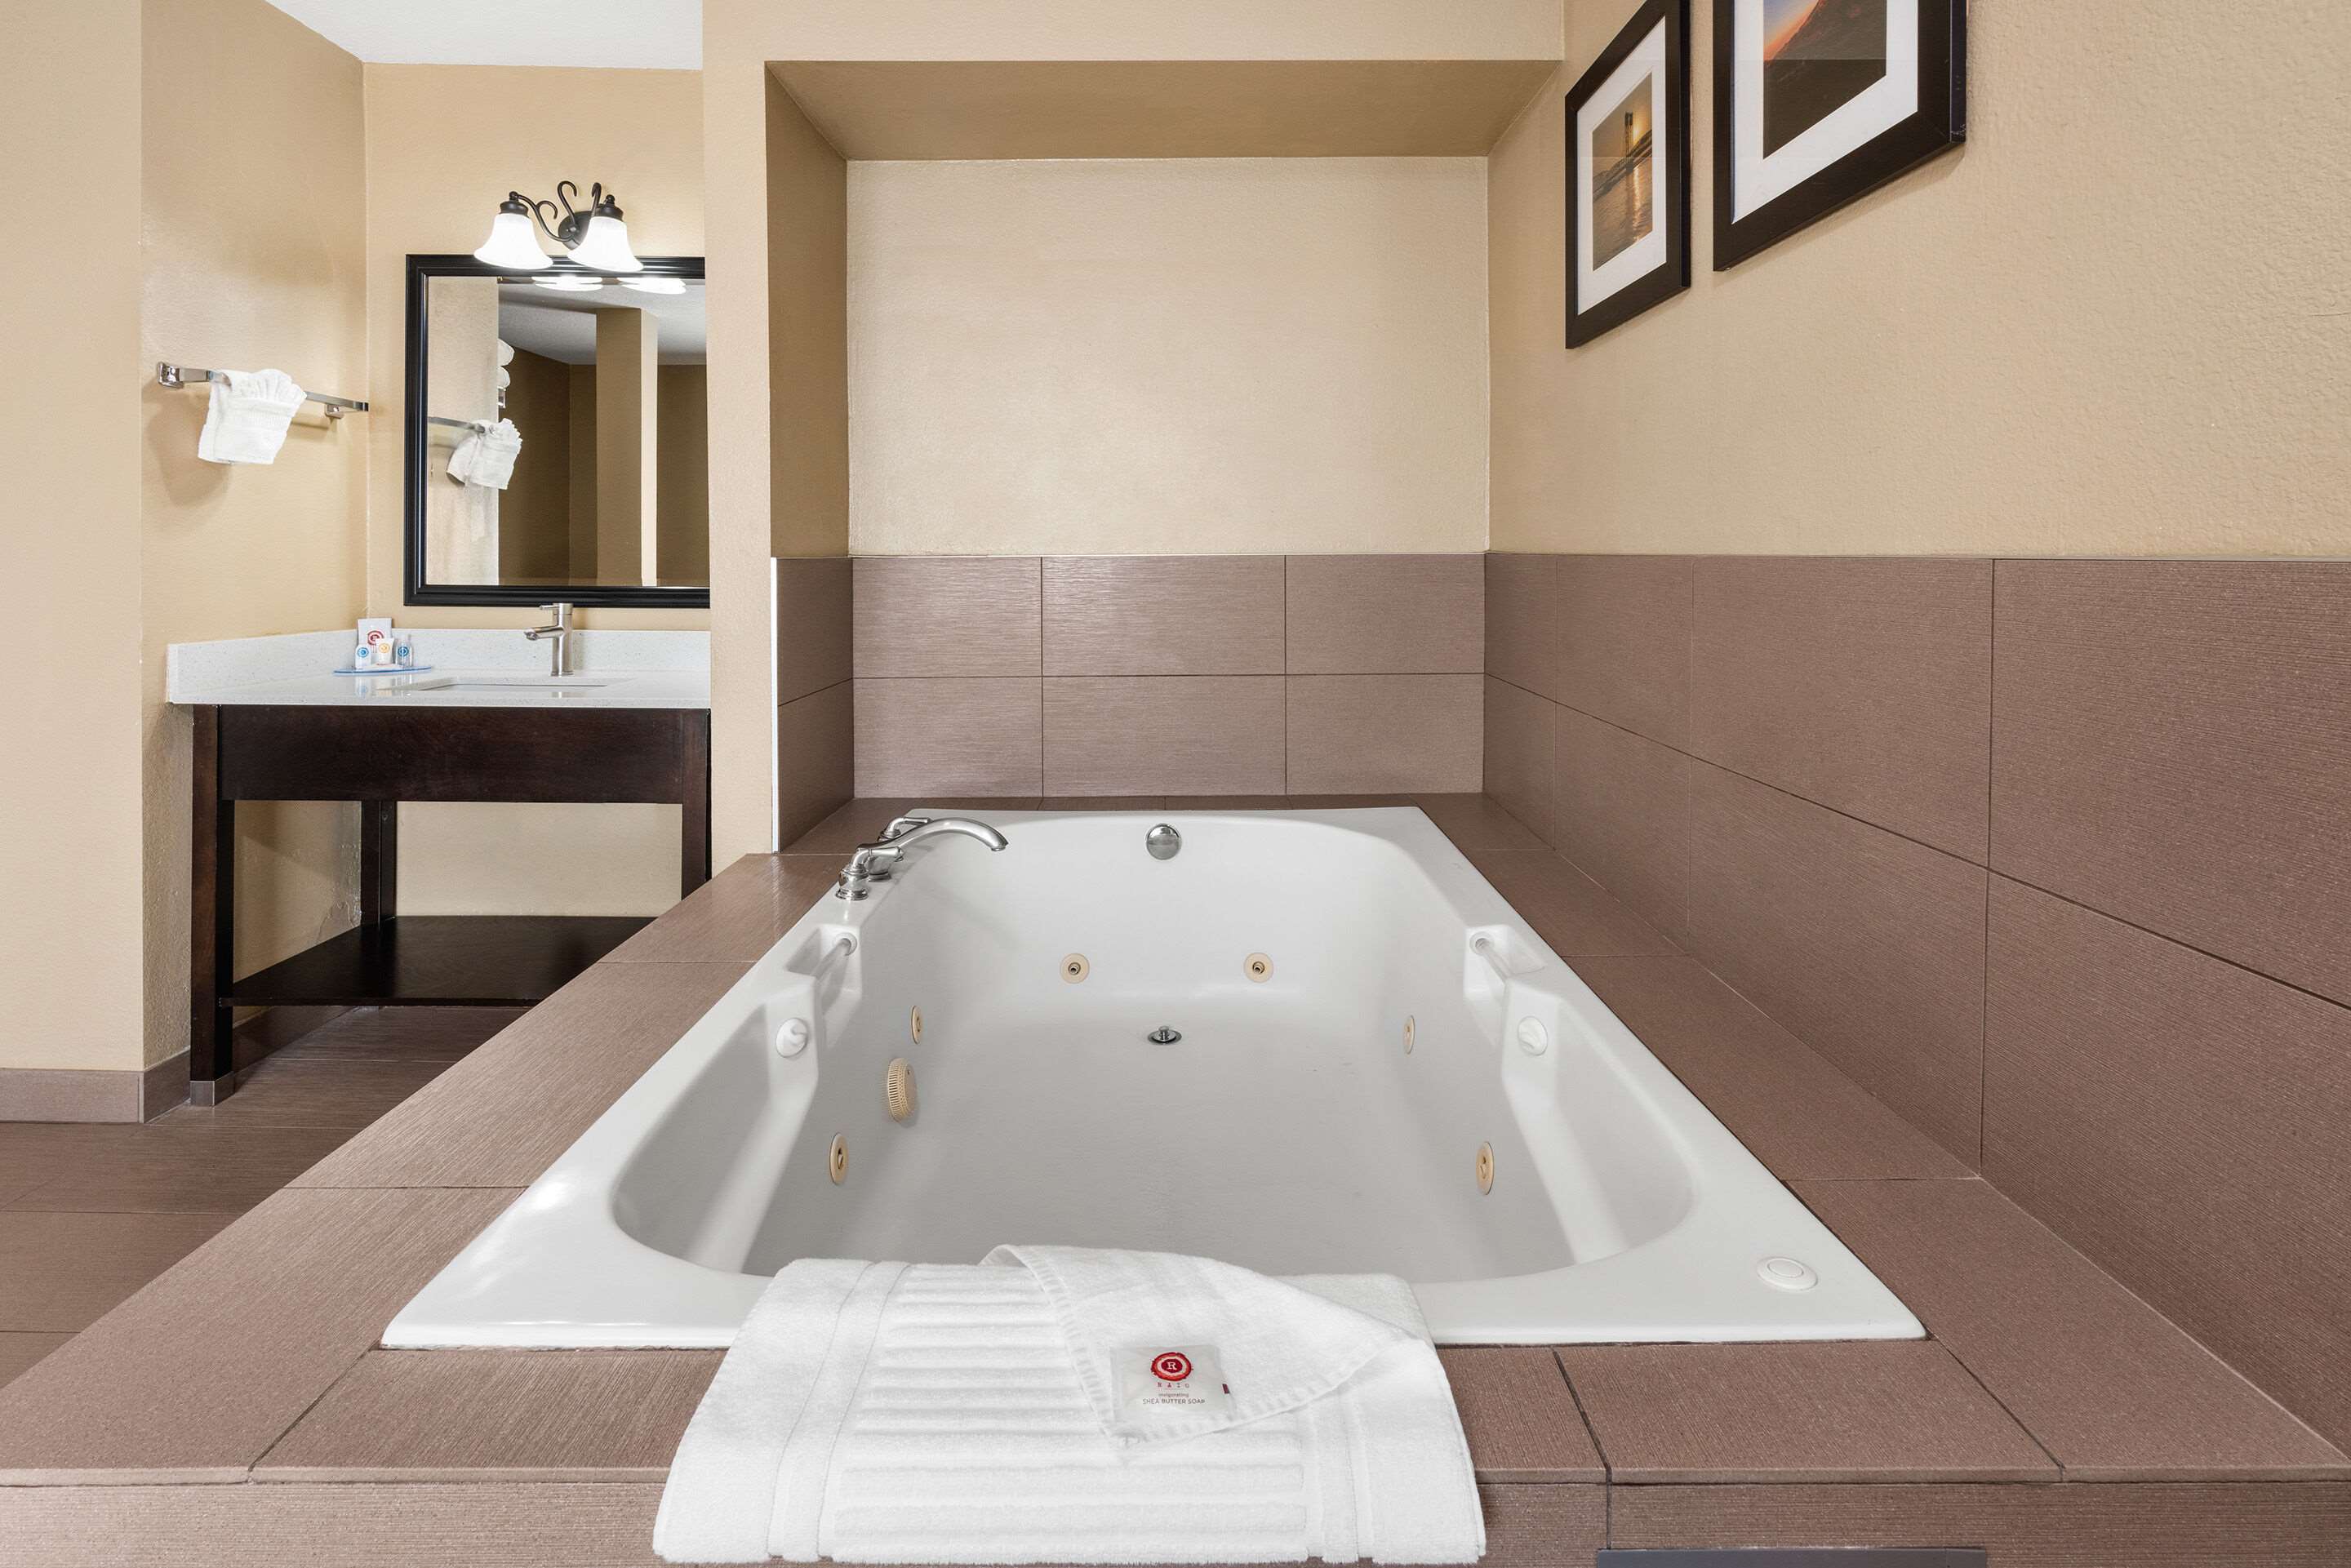 King suite with whirlpool bathtub